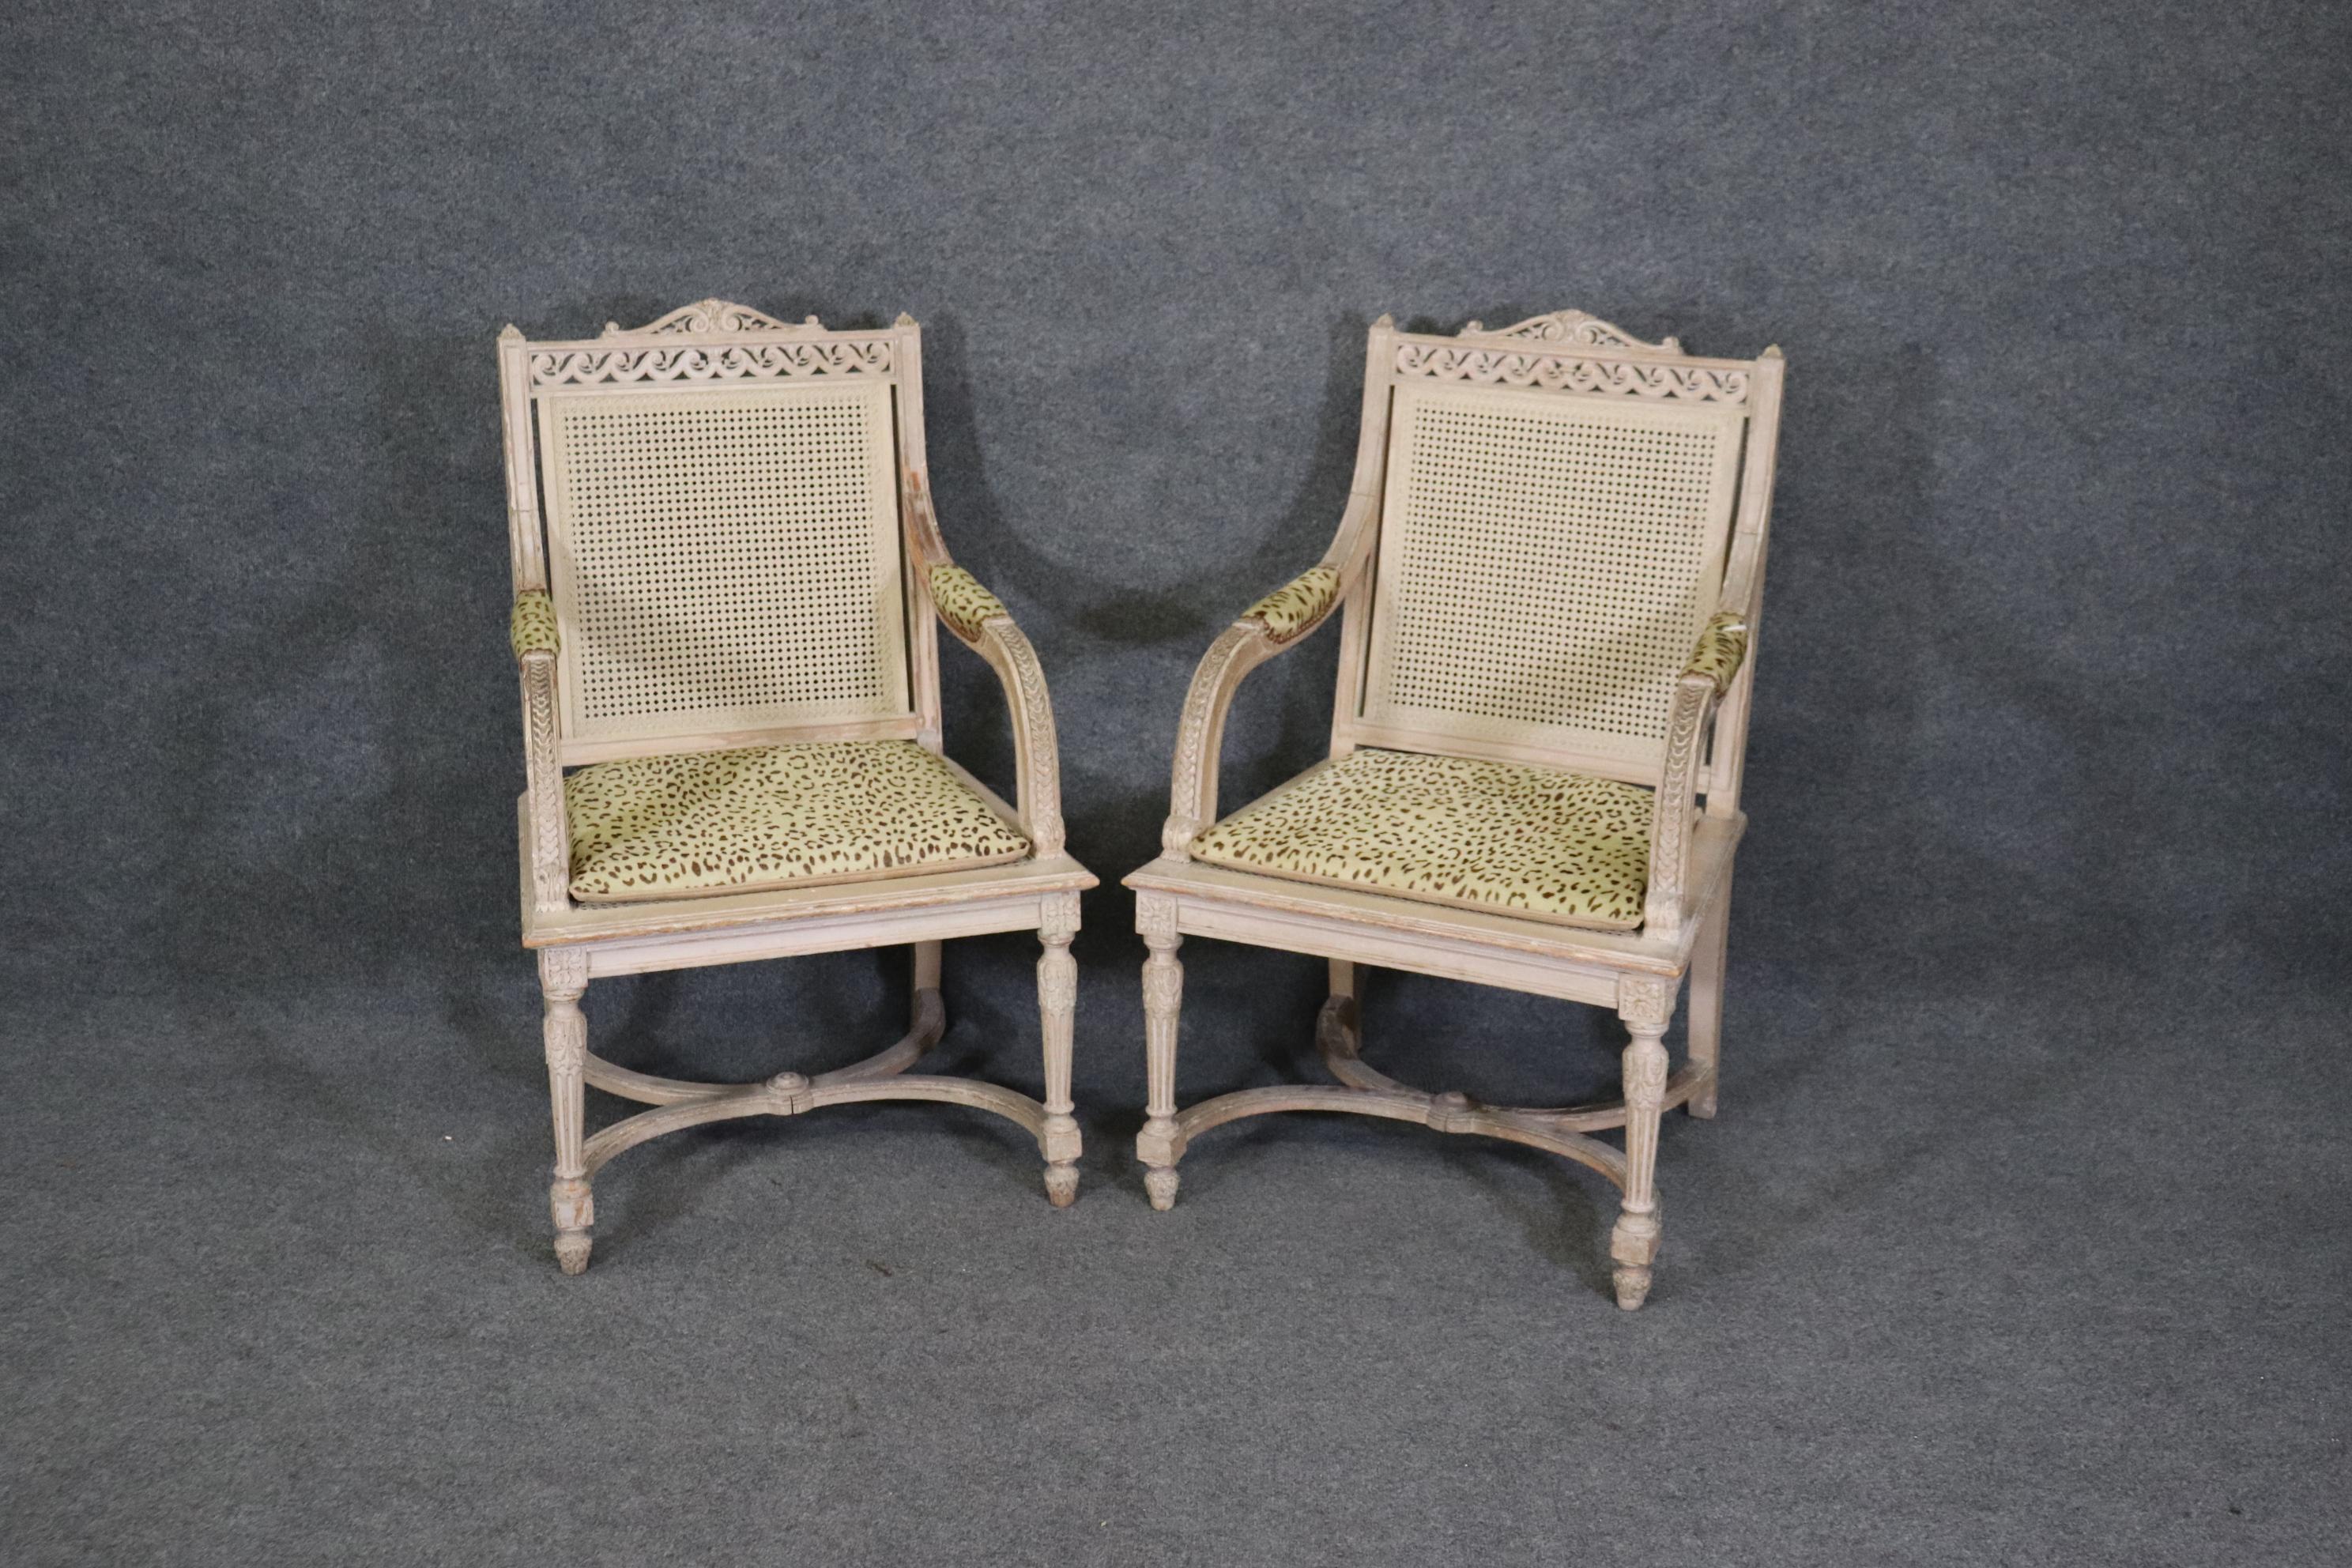 This is a beautiful pair of antique cane and paint decorated cane armchairs that can be used for the head of a dining table. The chairs are very distressed from time and will show paint loss but no damage to the cane and they even have cheetah